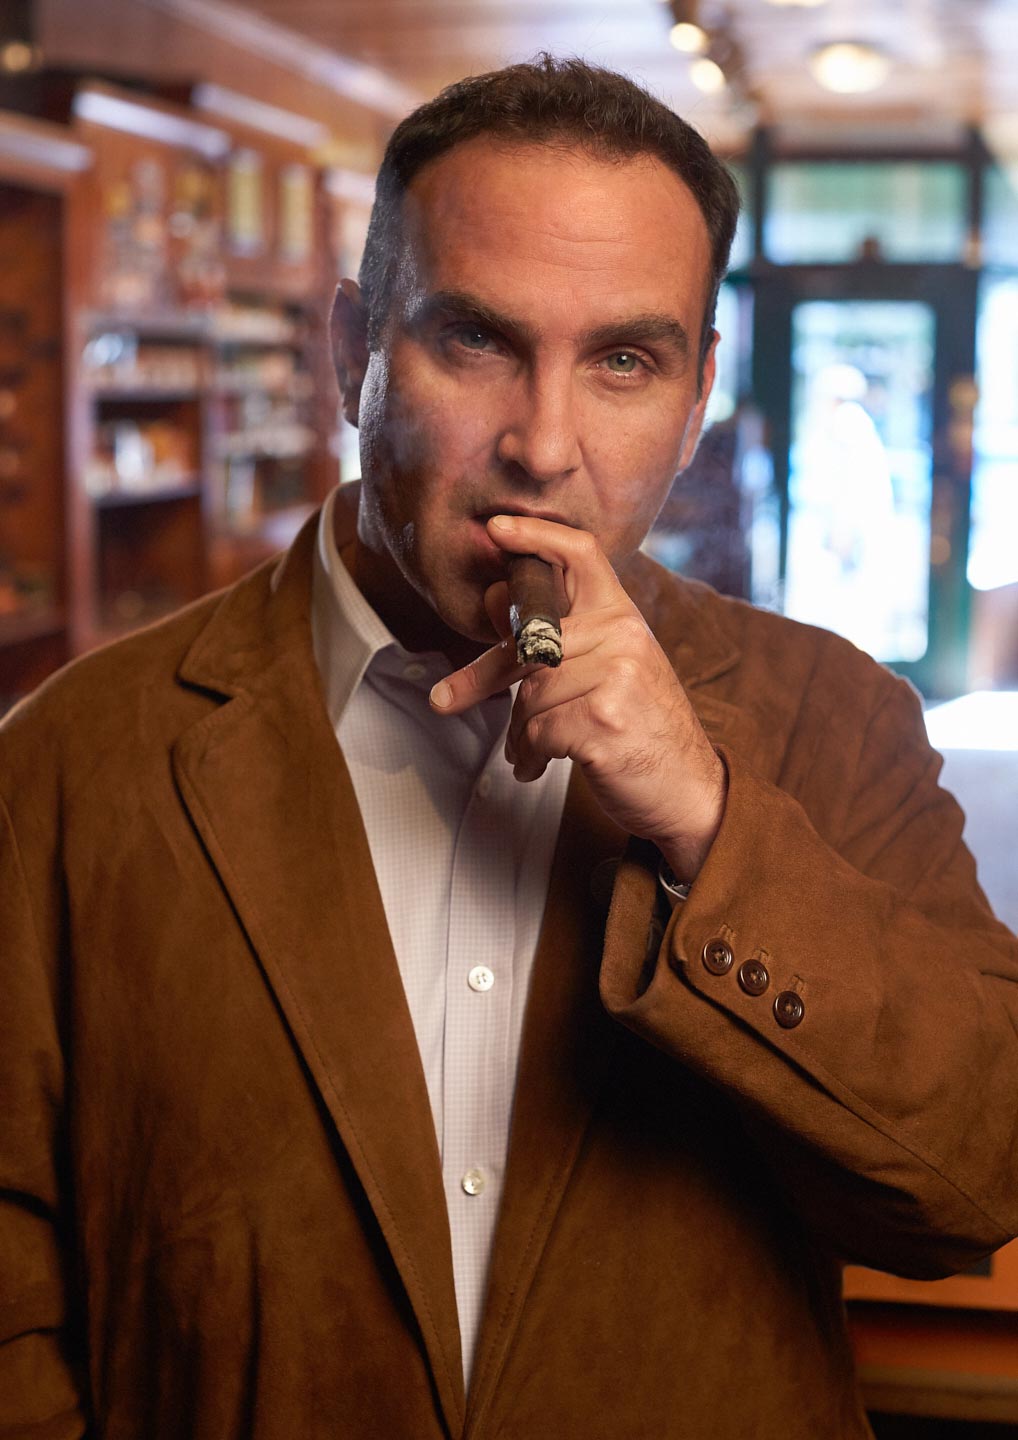 Jorge Armenteros, owner of A Little Taste of Cuba and founder of Tobacconist University. Princeton, NJ. July, 2015.